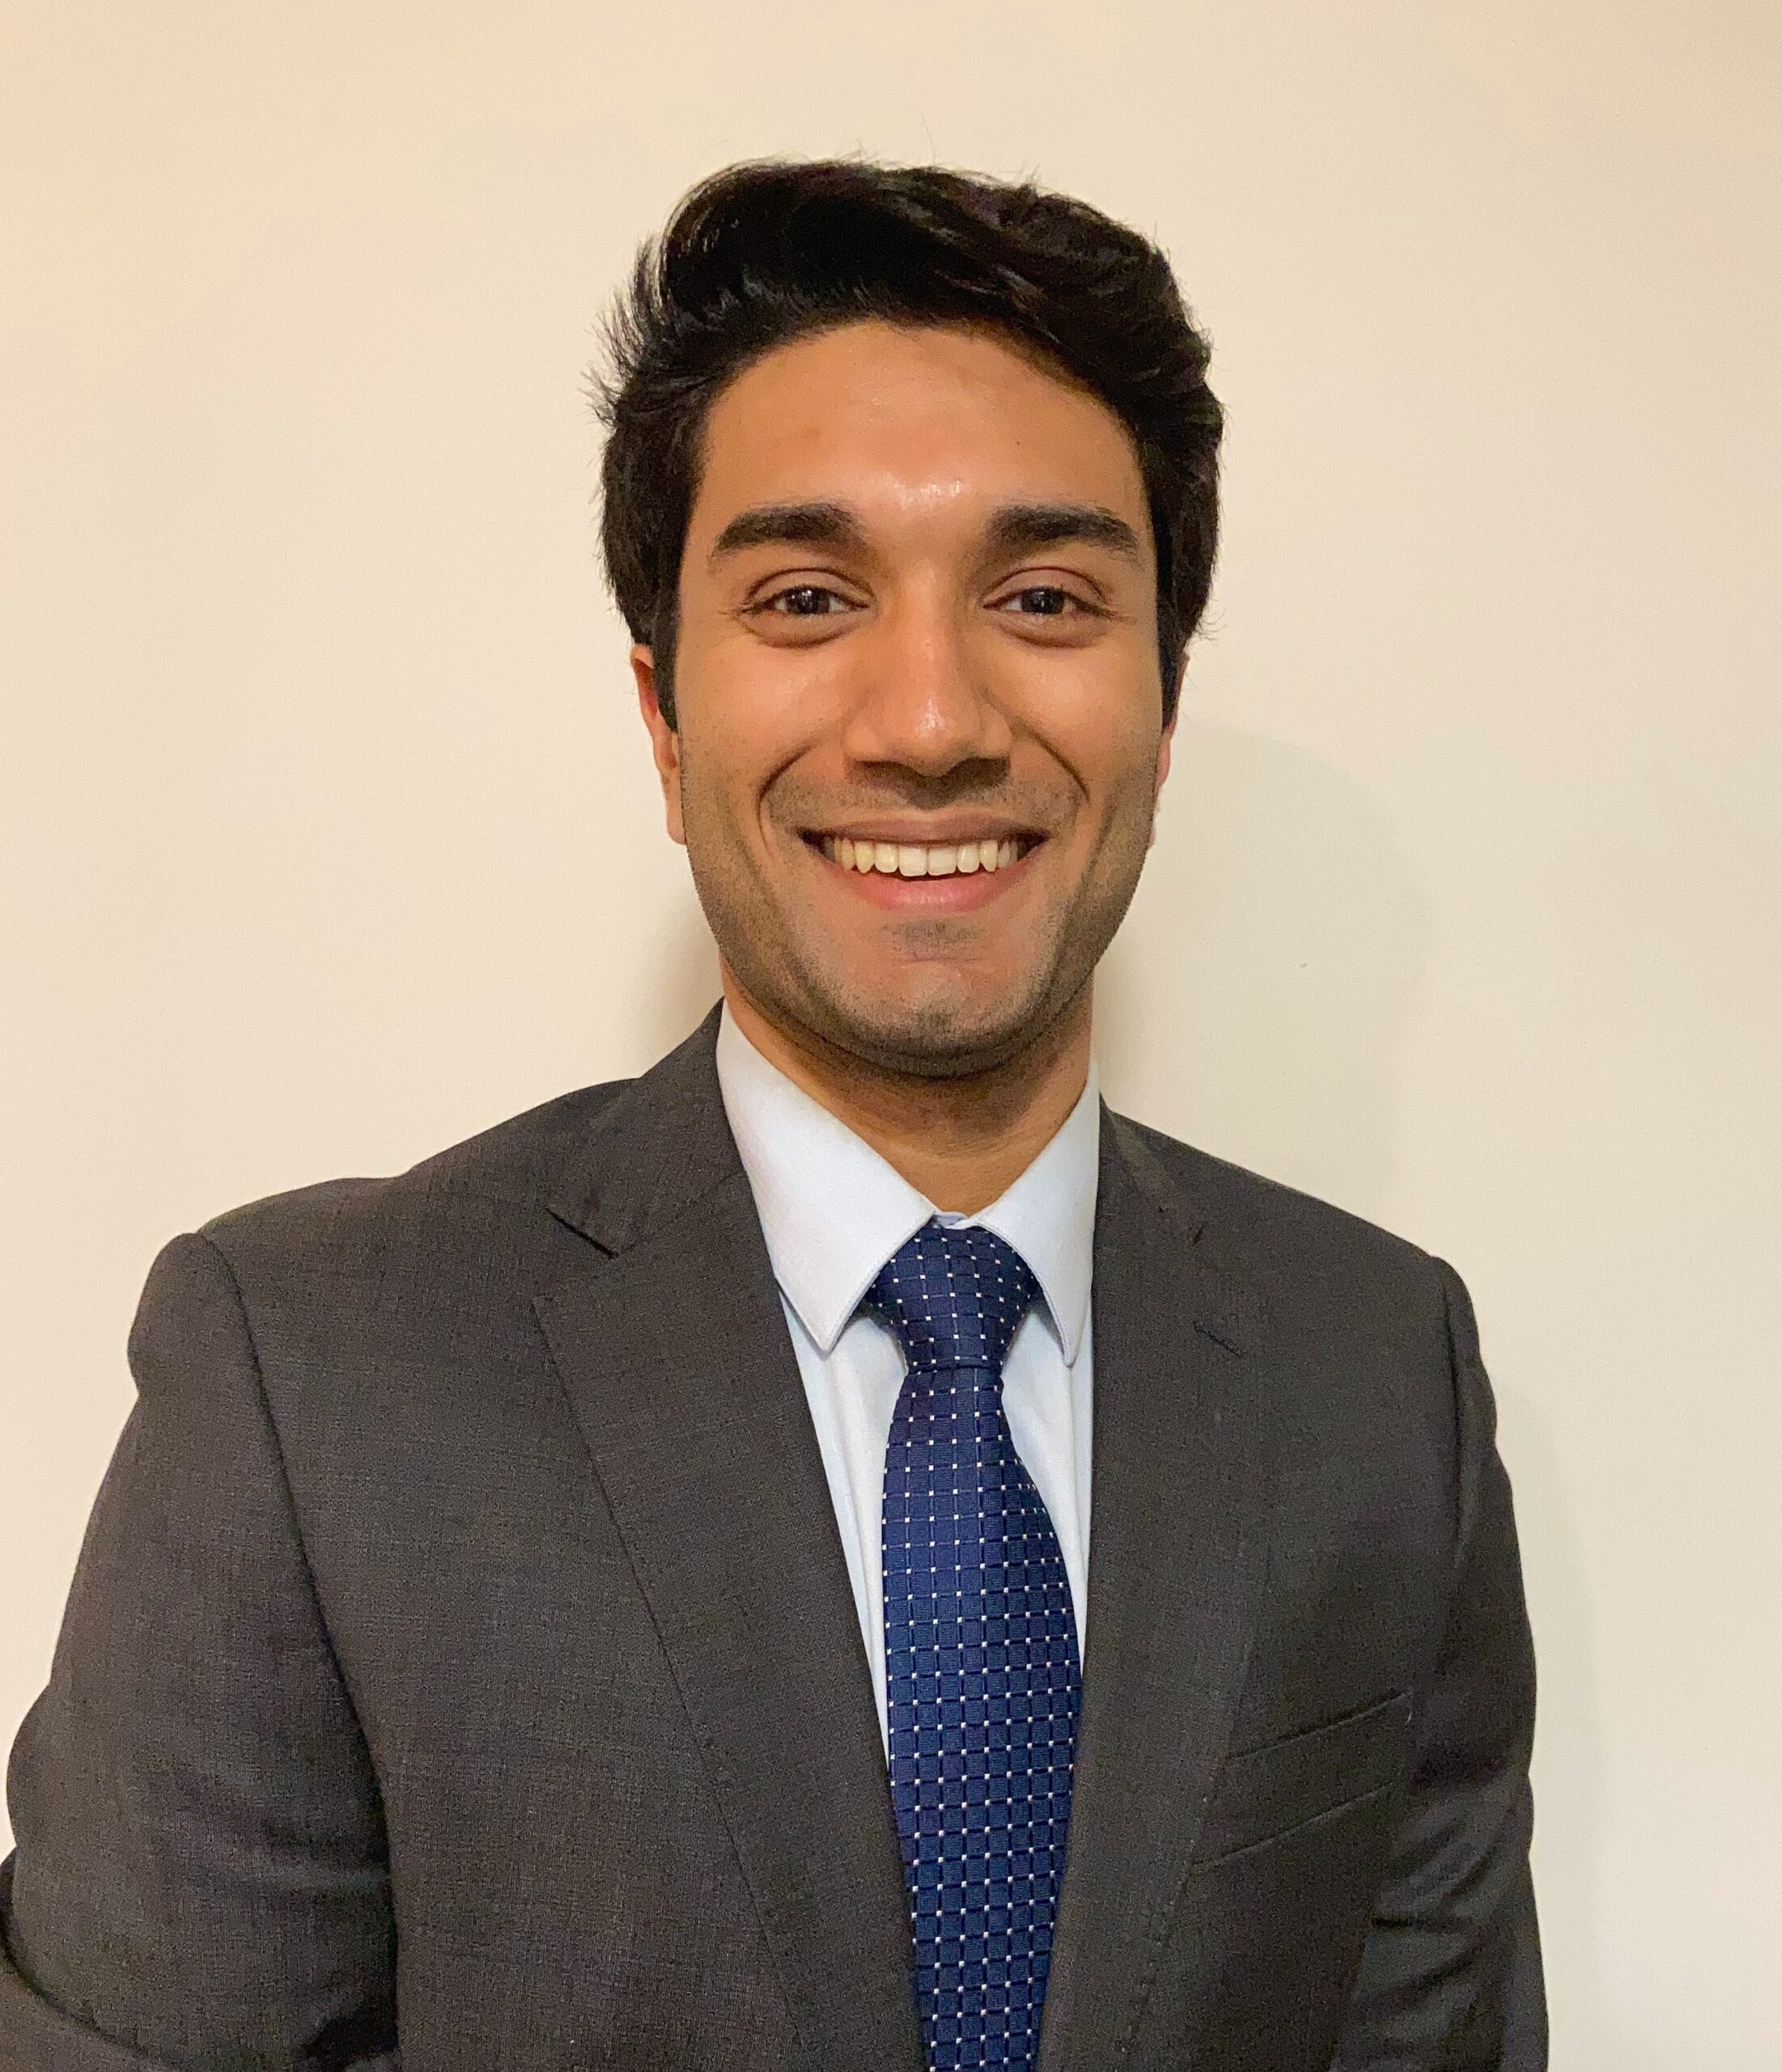 UNC Urology Matches Apoorv Dhir, MD for Urologic Oncology Fellowship